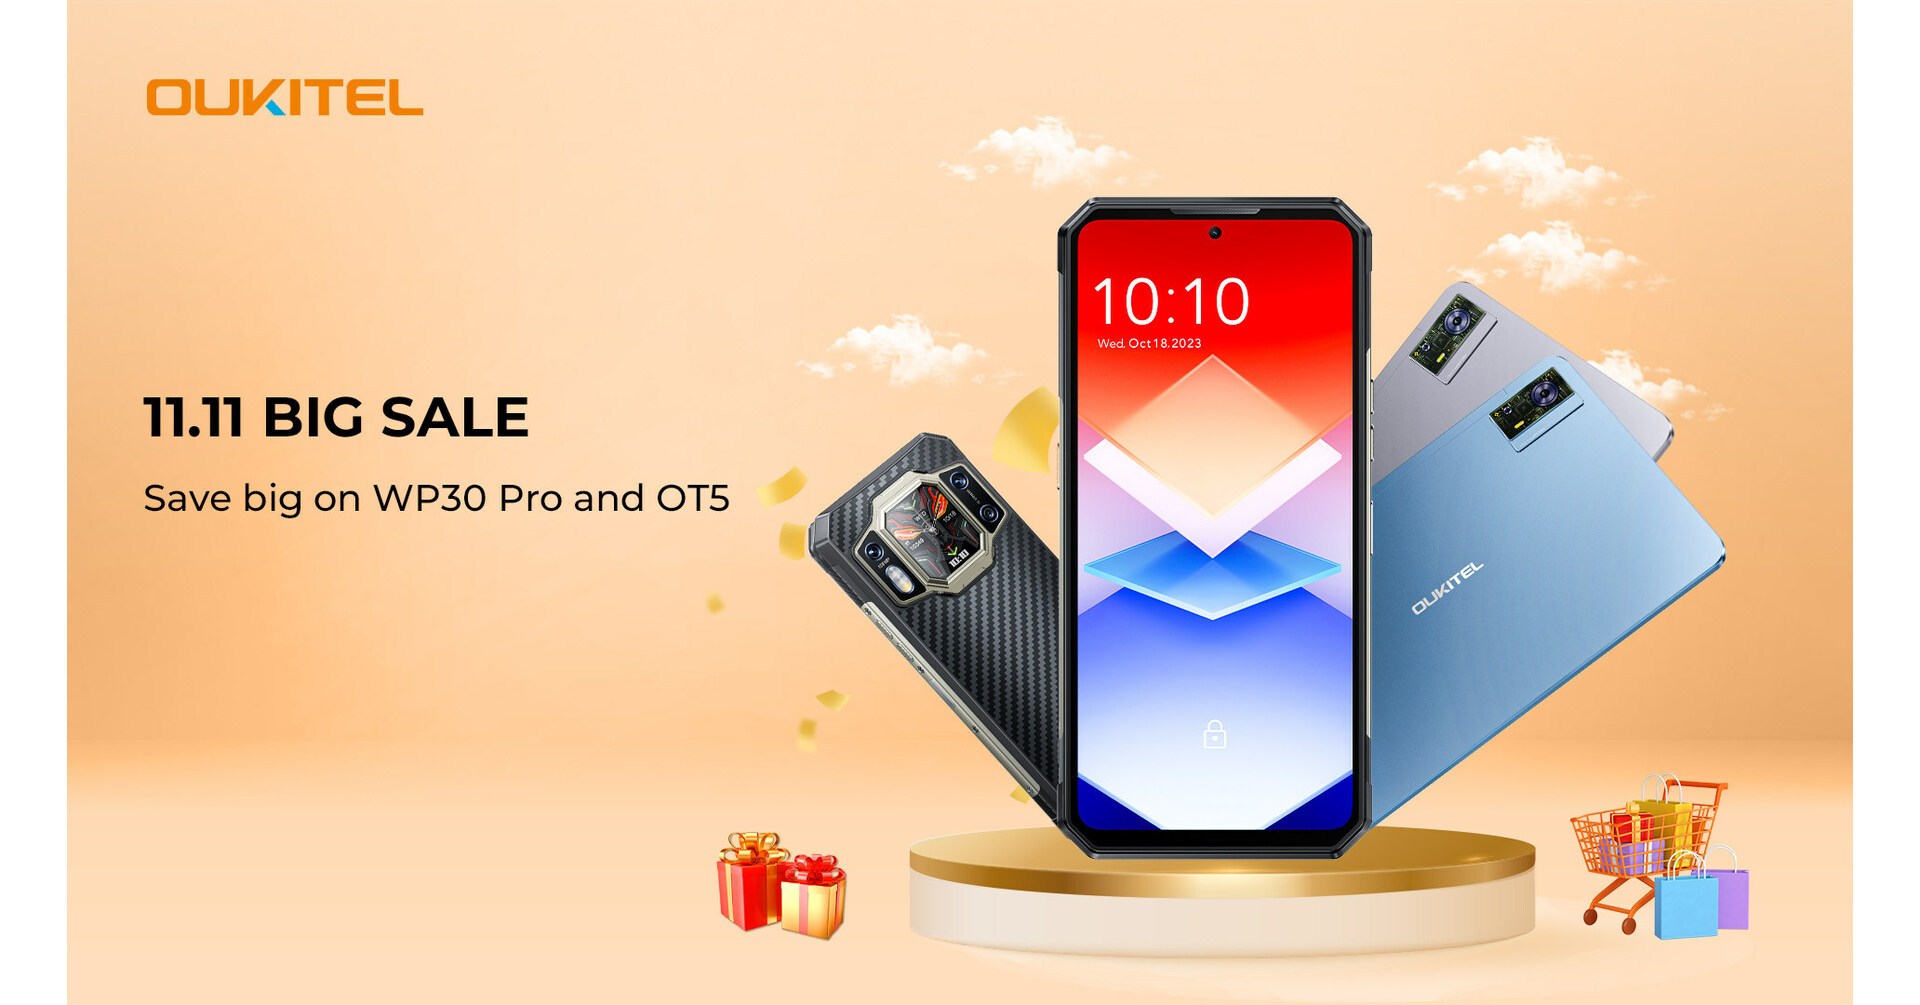 About to announce Oukitel WP30 Pro 